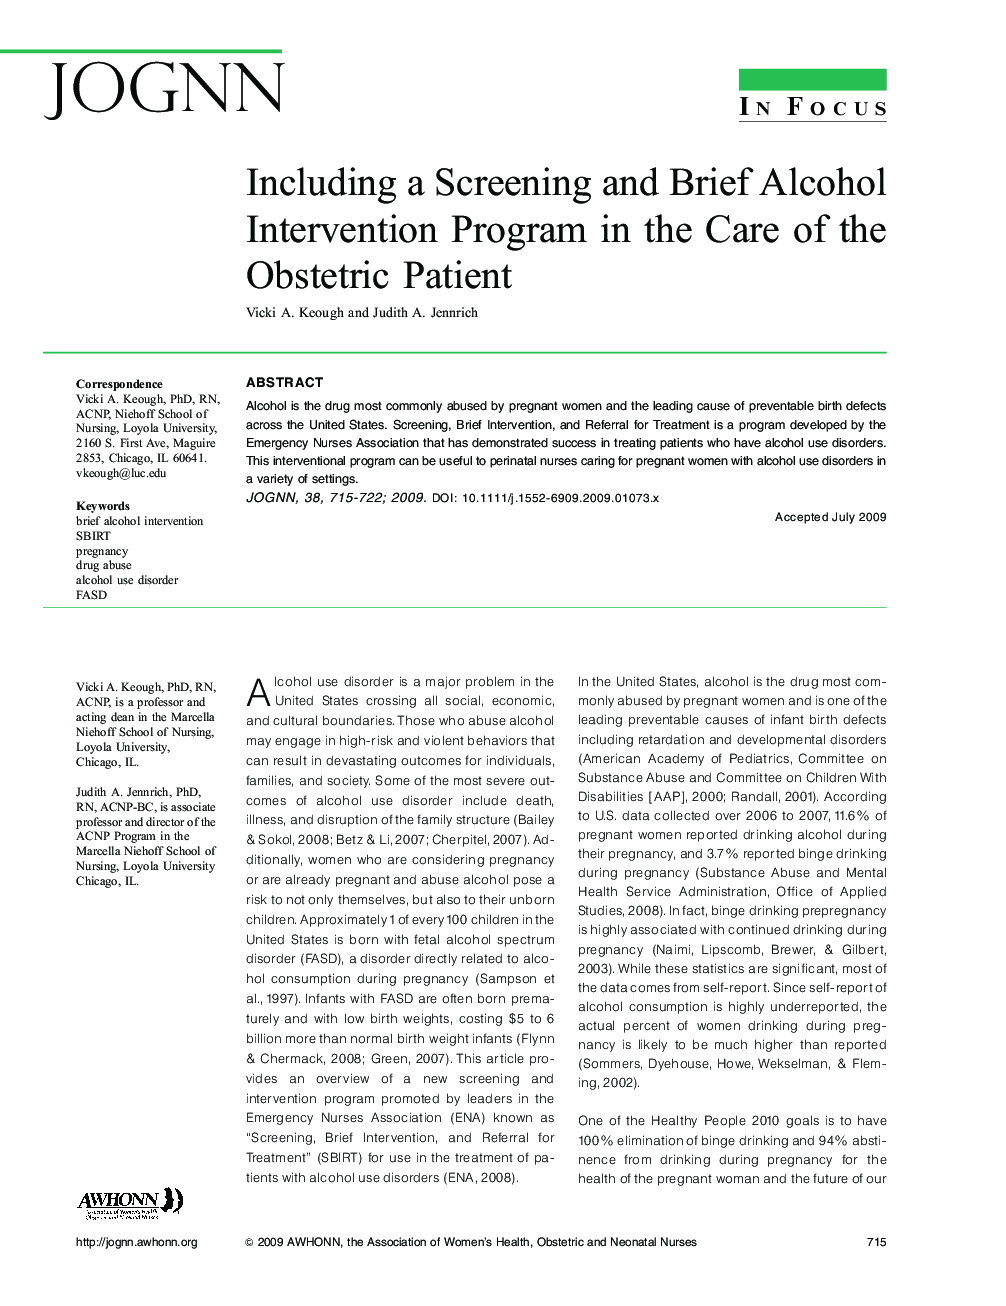 Including a Screening and Brief Alcohol Intervention Program in the Care of the Obstetric Patient